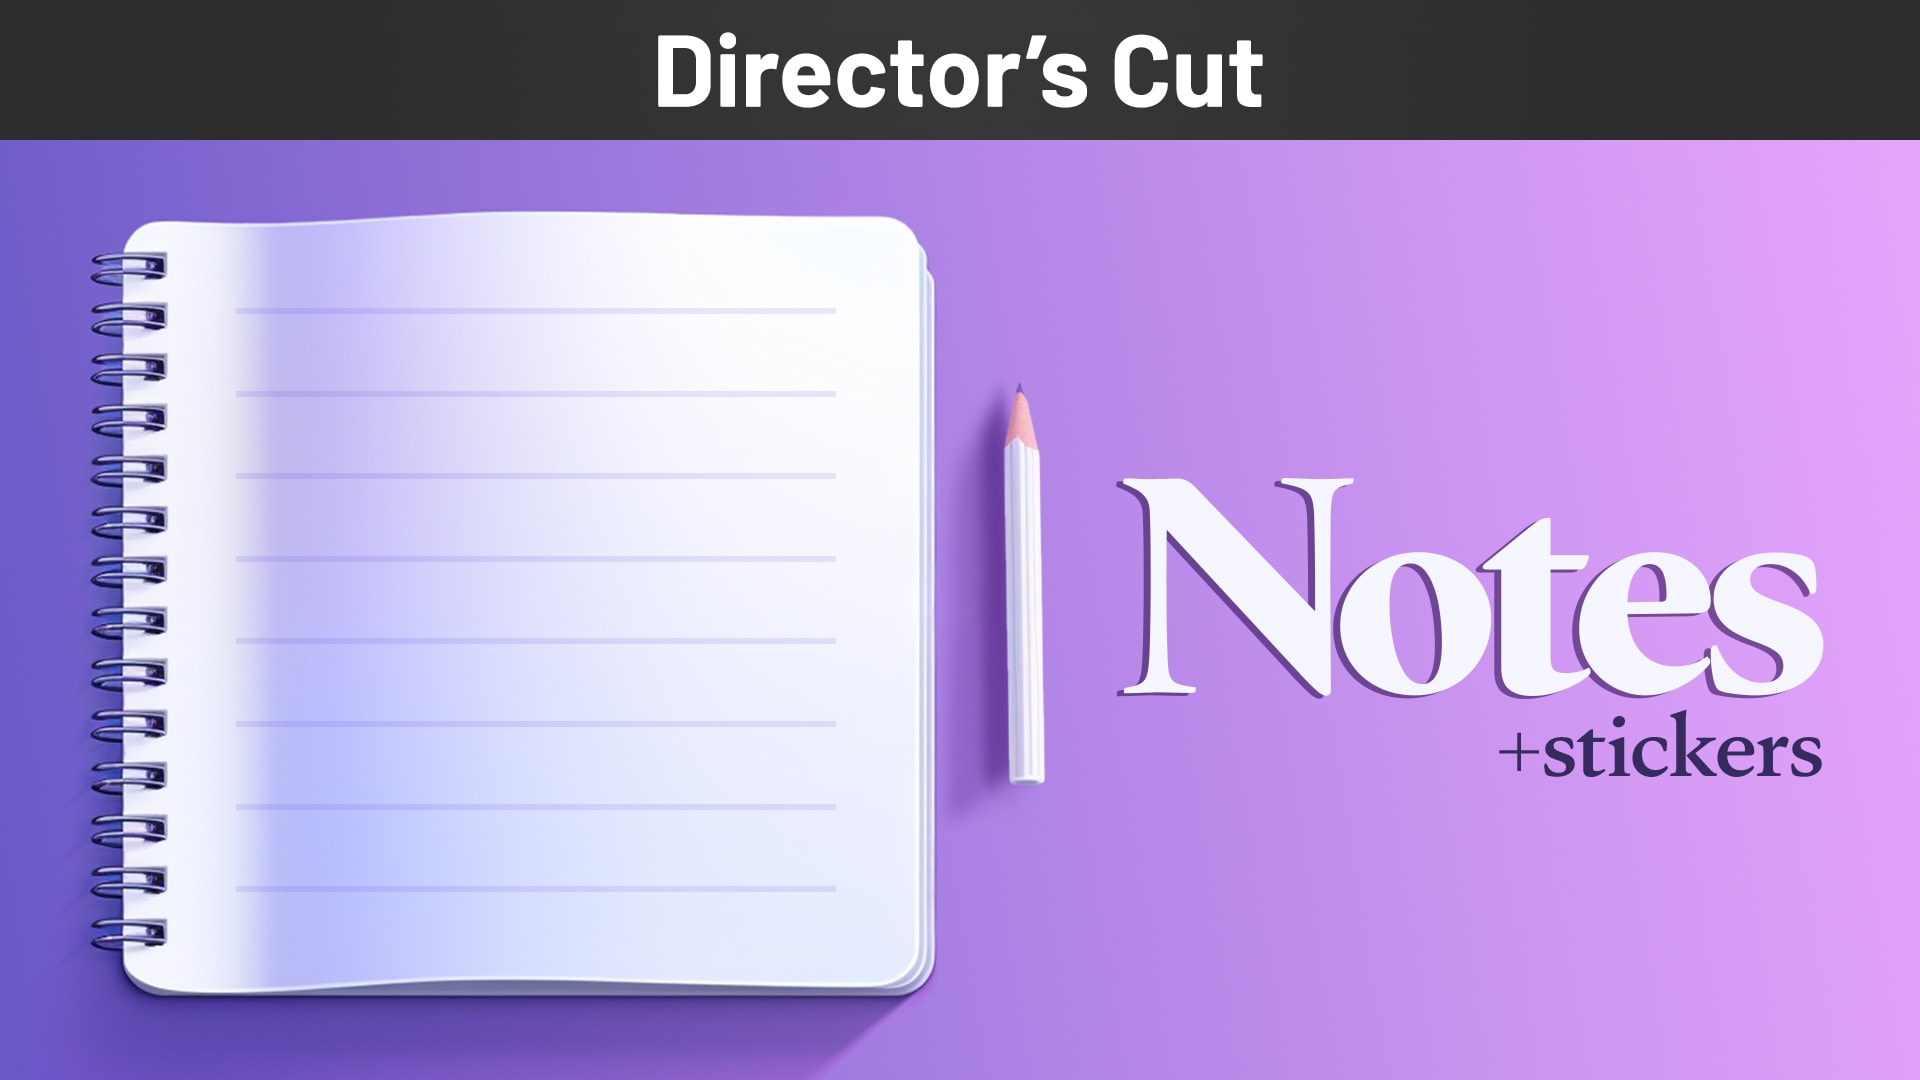 Notes + Stickers Director's Cut